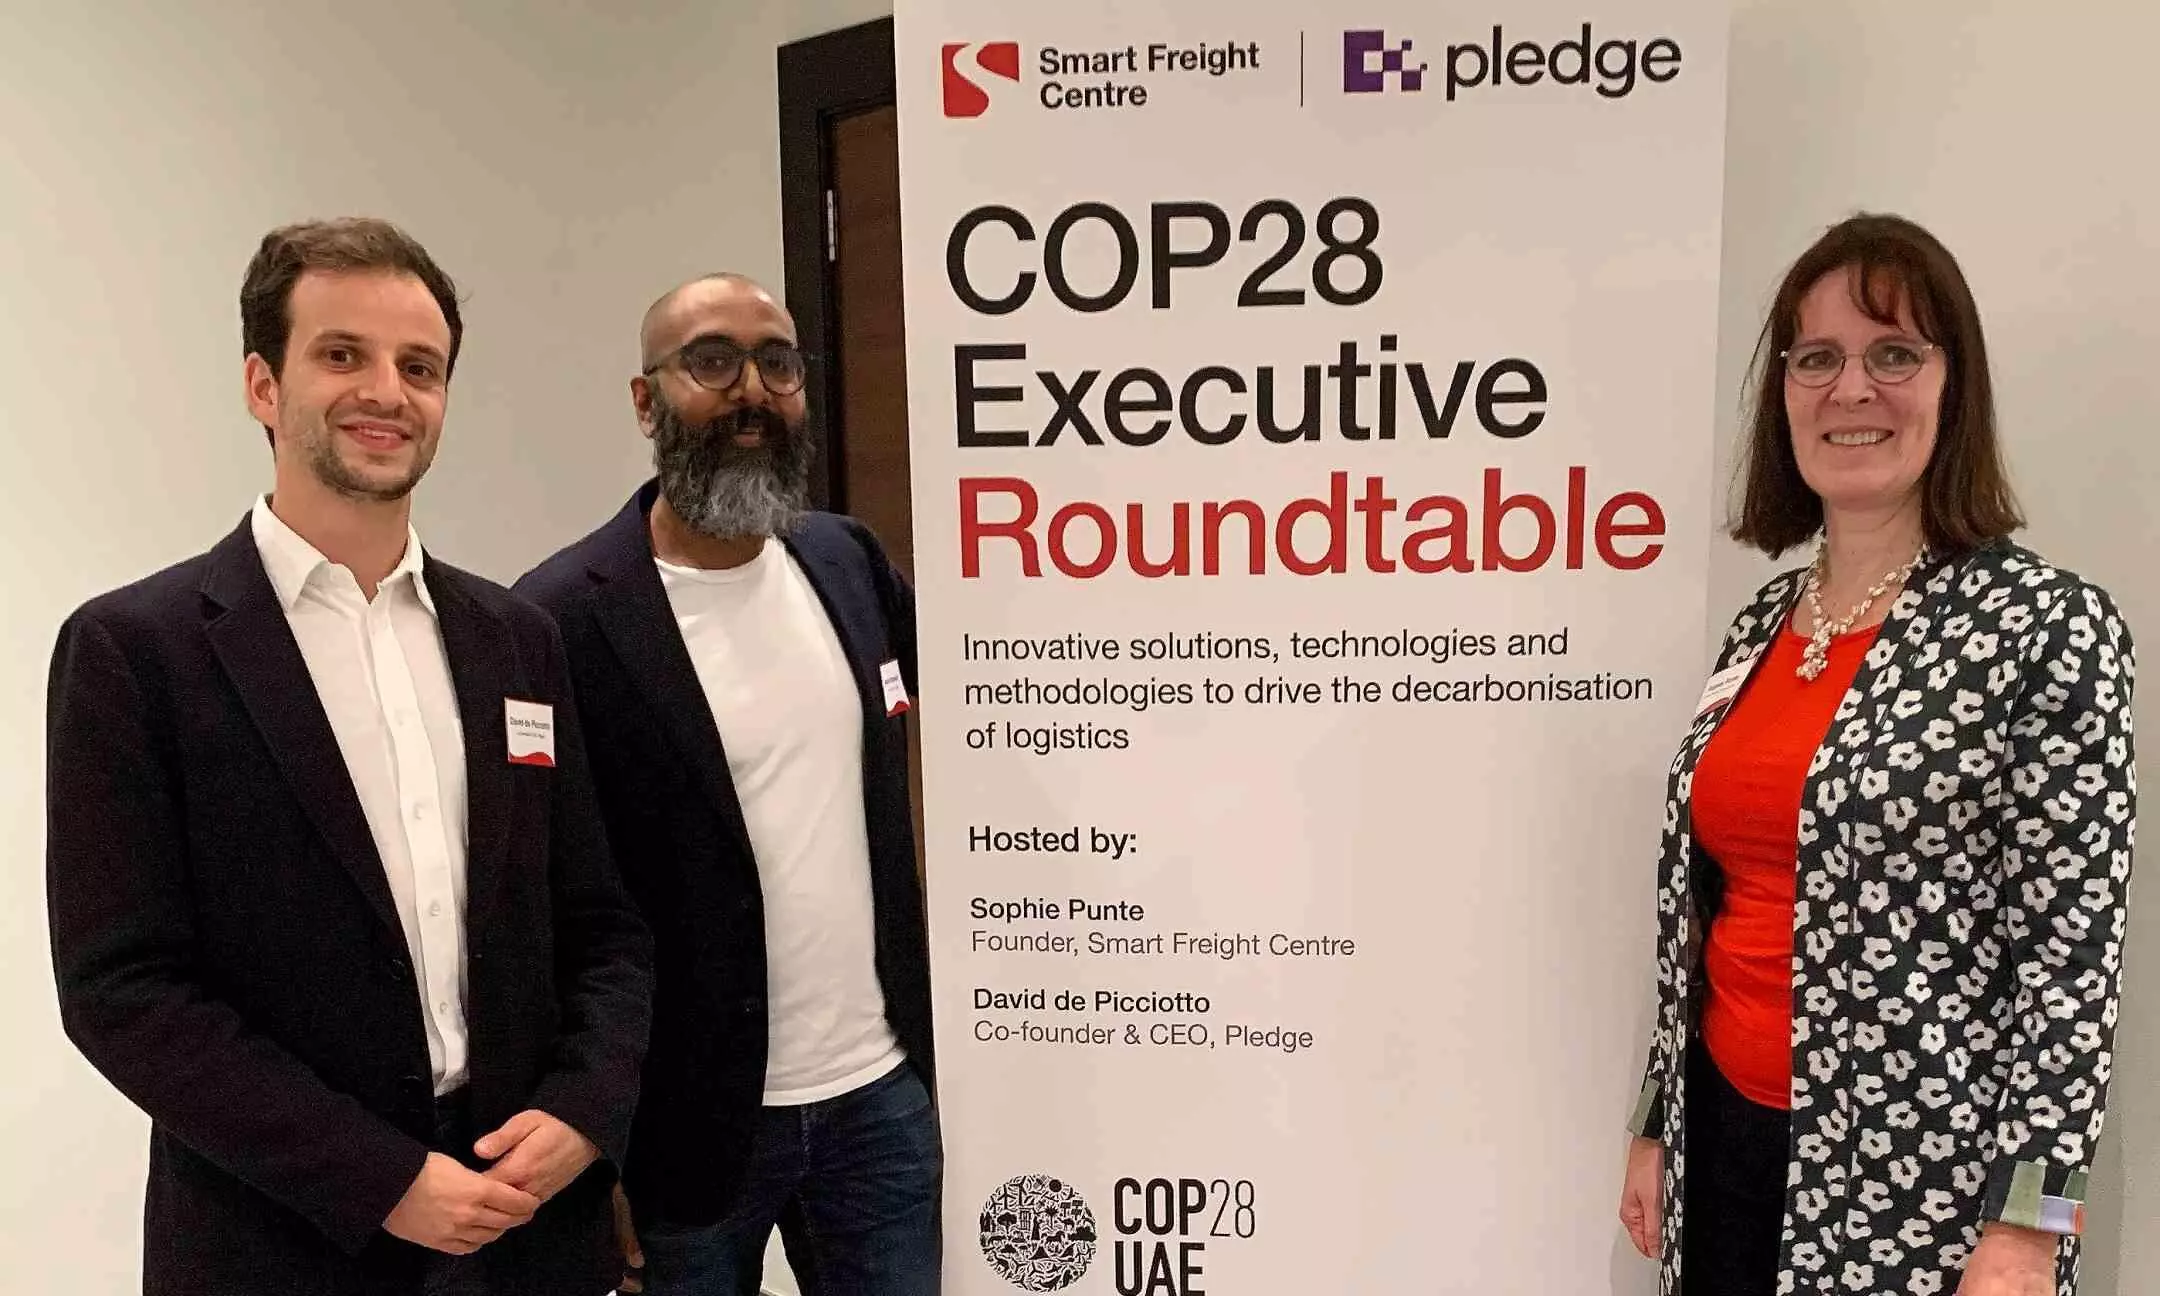 Pledge, SFC identify 10 steps to decarbonising supply chains